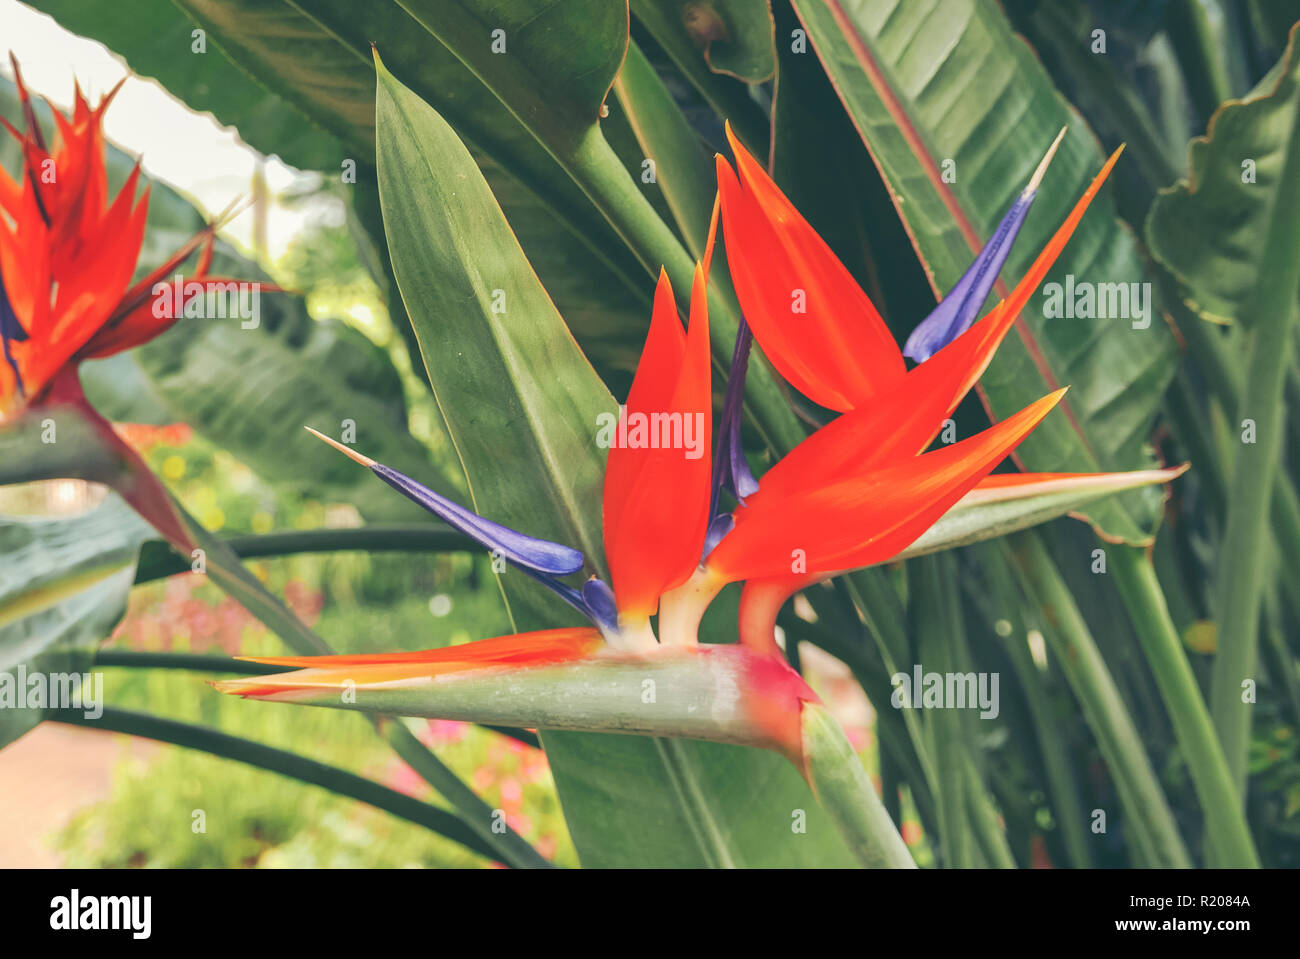 Fresh orange bird of paradise flower bunch in daytime in nature for passion, relaxation, travel, season, time, holiday, agriculture and beauty concept Stock Photo